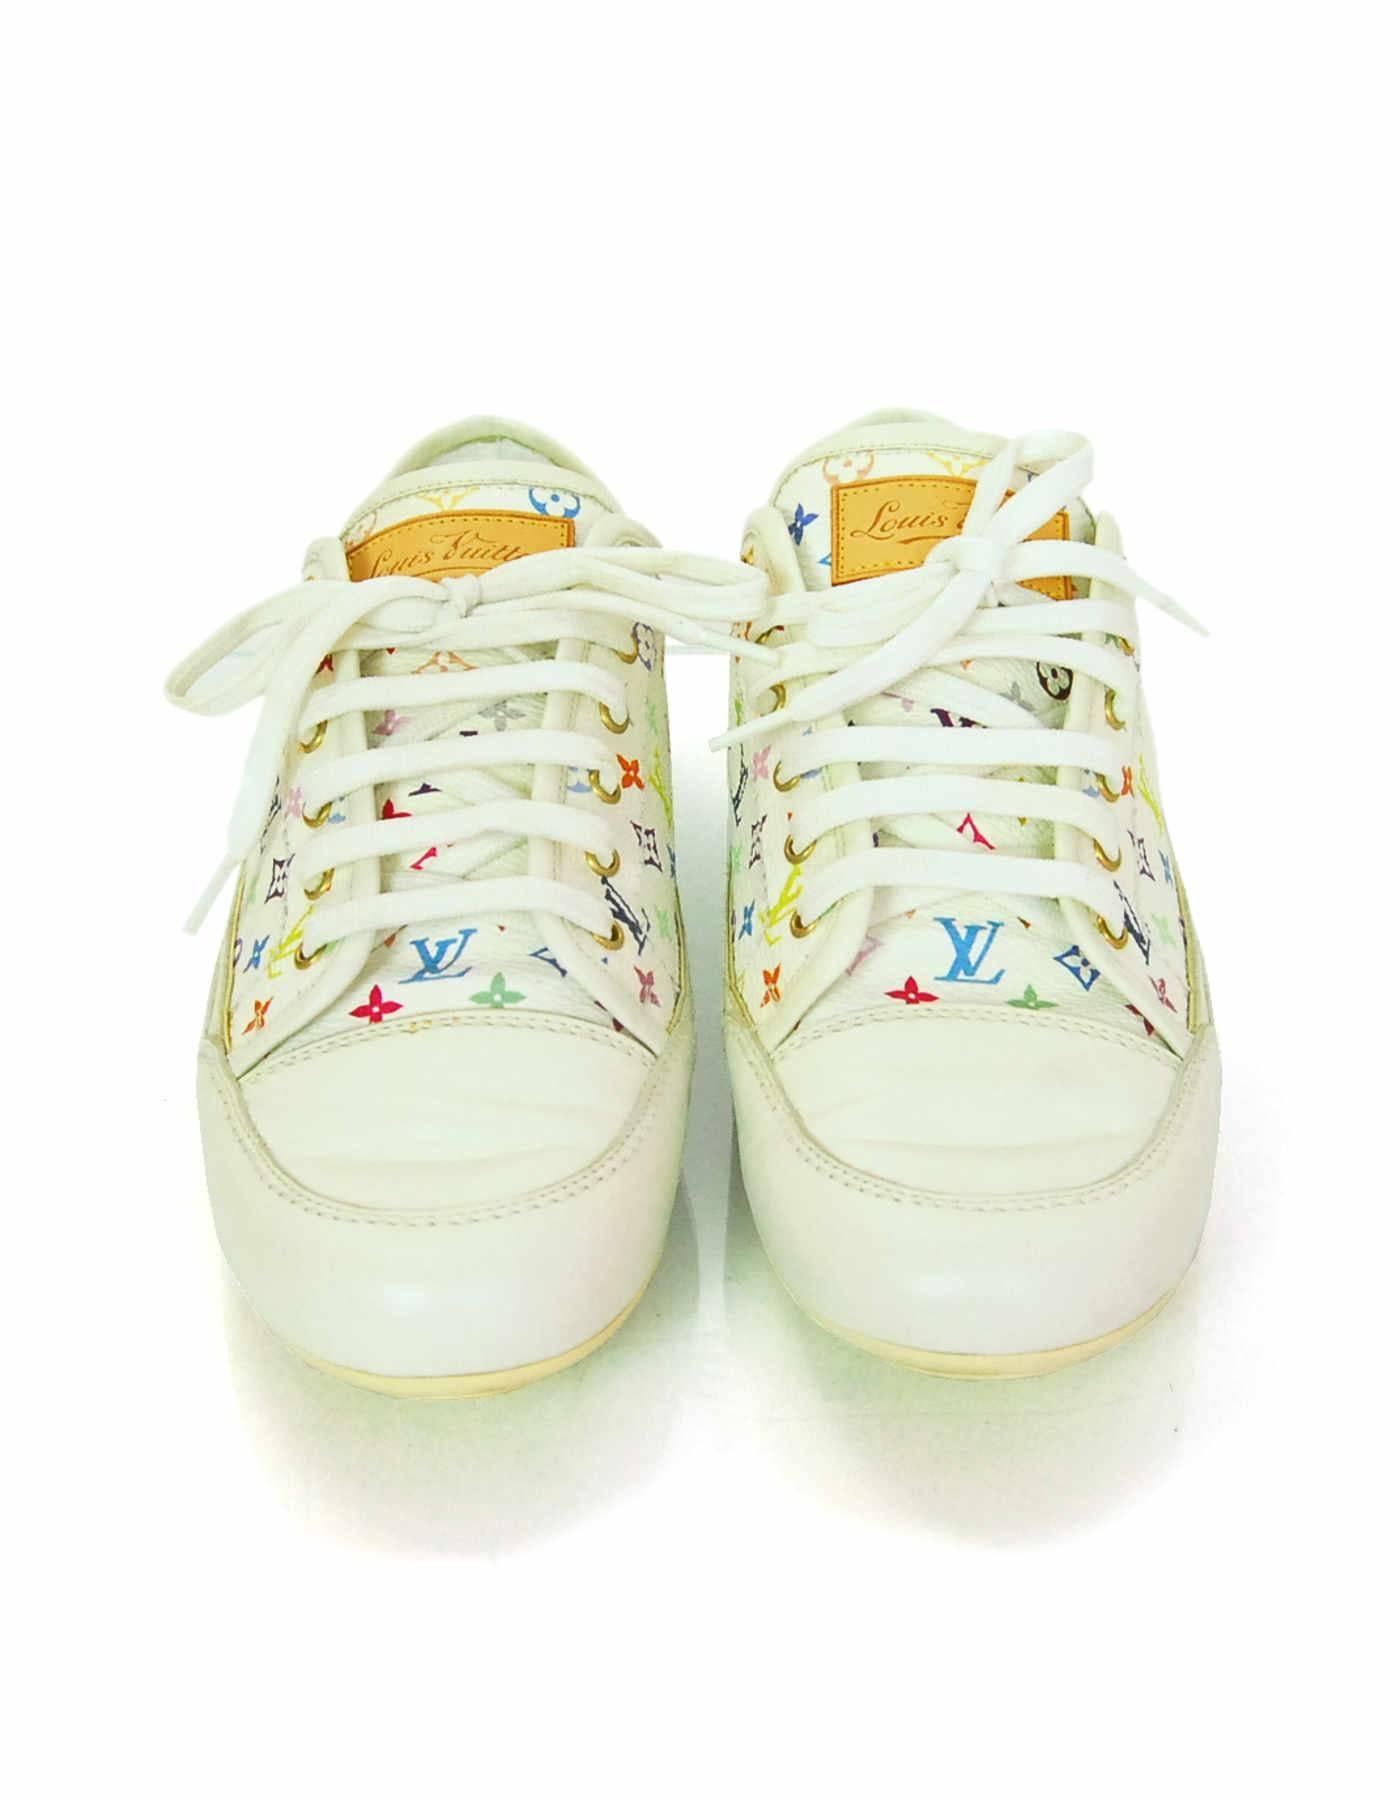 Louis Vuitton White & Multi-Color Monogram Sneakers Sz 37.5

Made In: Italy
Color: White, multi
Closure/Opening: Lace tie closure
Sole Stamp: BA1007 37.5
Overall Condition: Very good pre-owned condition with the exception of some wear and soiling at